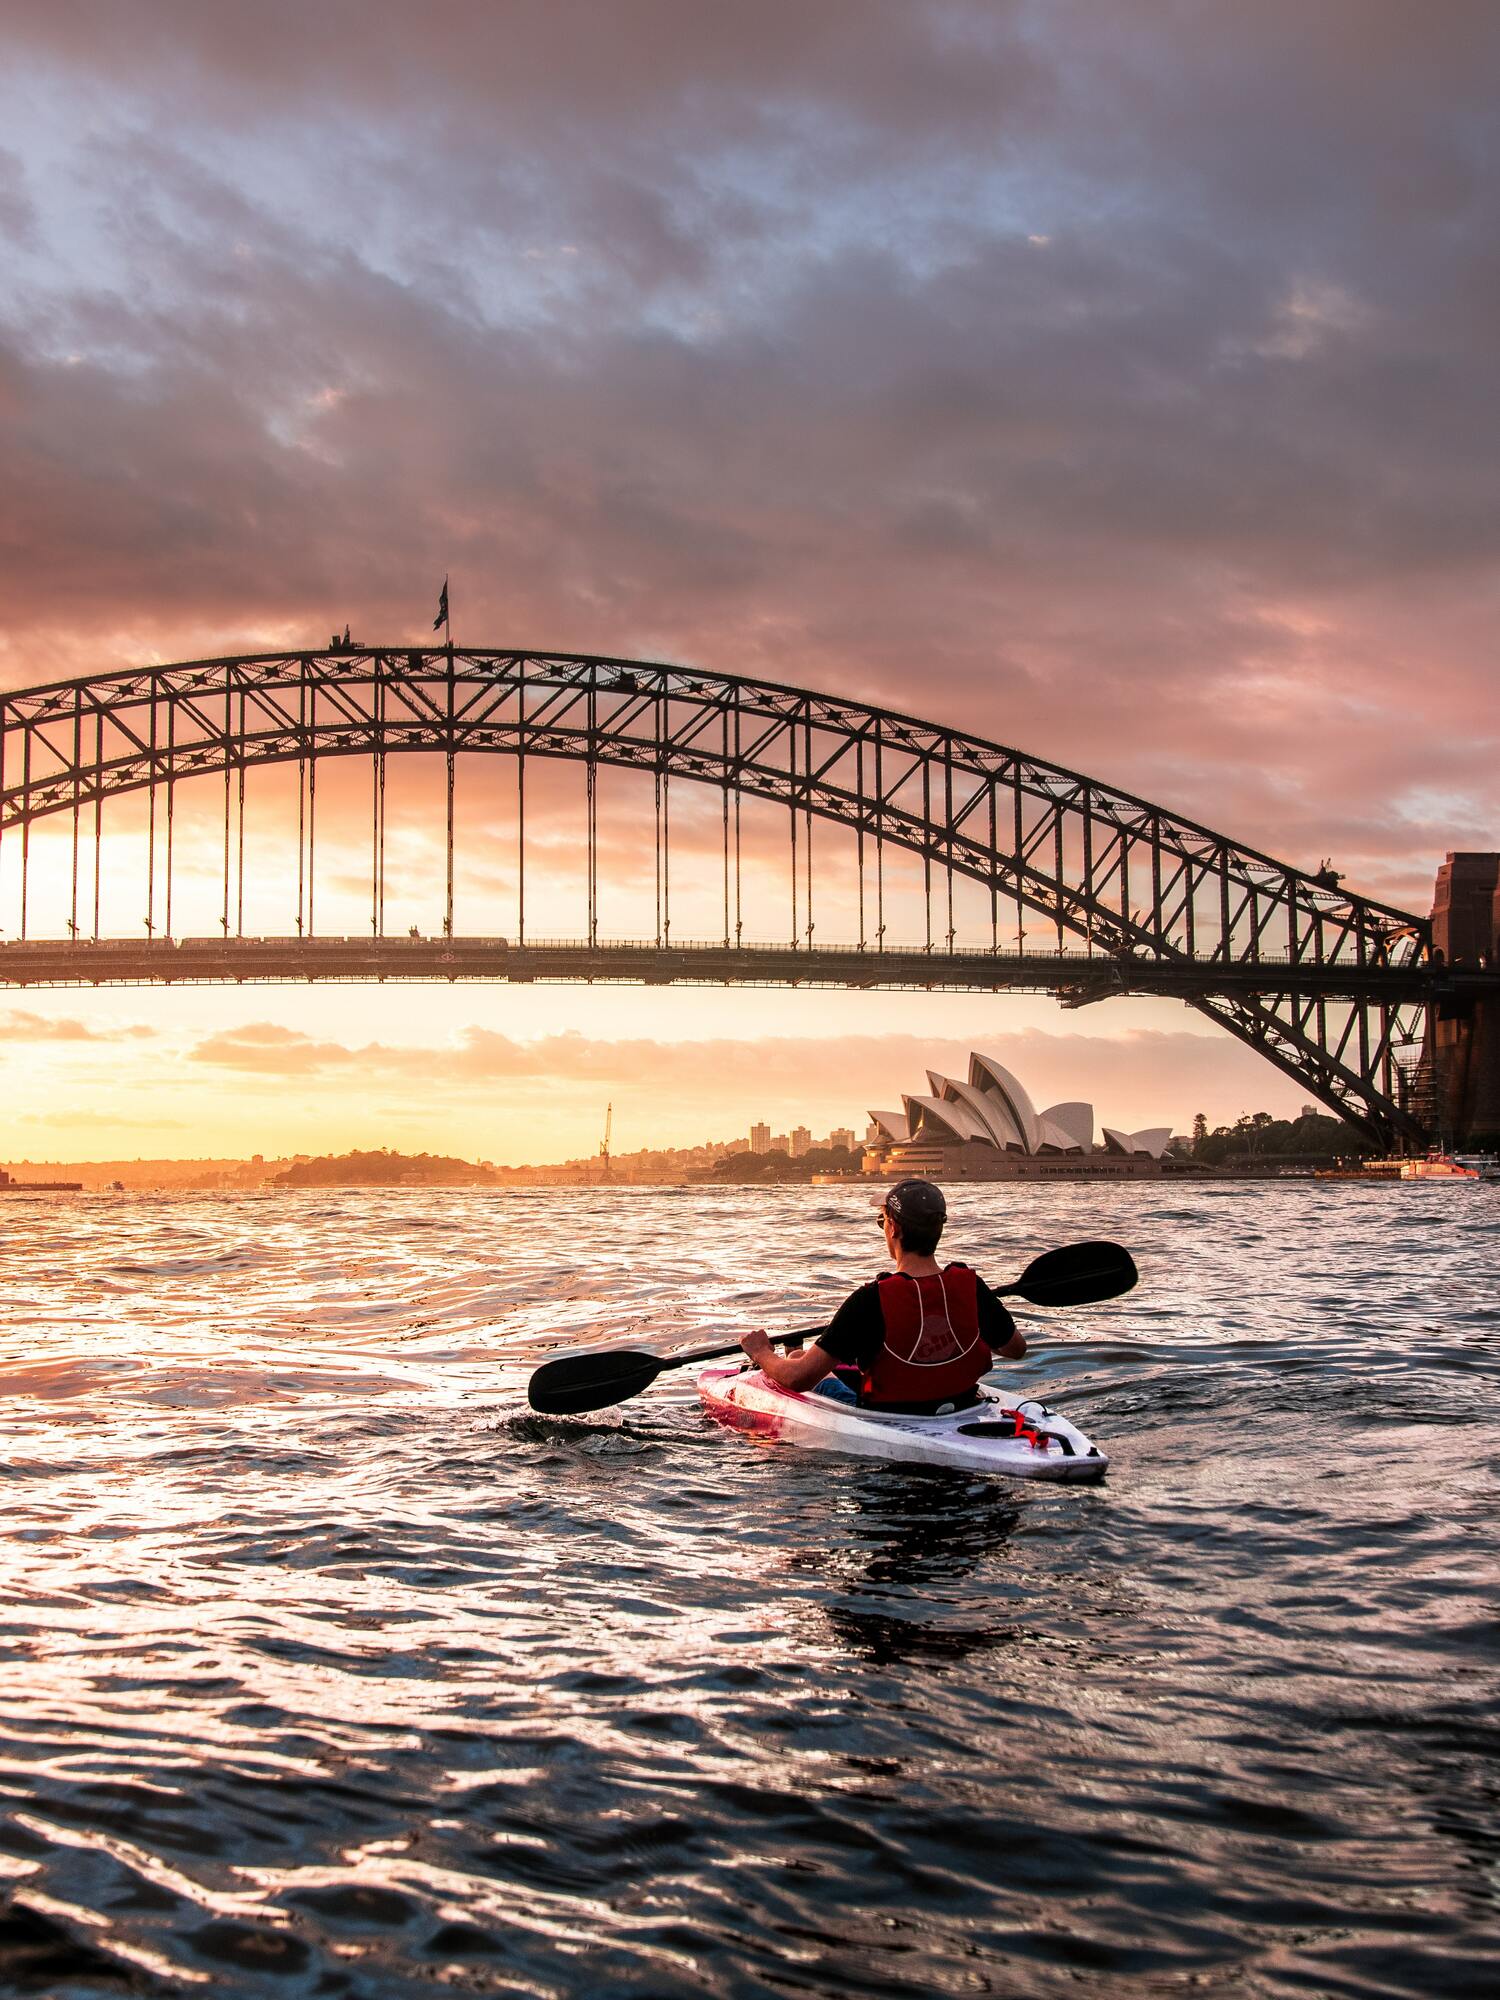 <p>One of the popular outdoor activities in Sydney Bay is kayaking under the Harbour Bridge. This unique experience includes nature, the grandeur of the bridge, and, above all, an unbeatable view of the Opera House. The best time to go out on the river is at sunset when the scenery becomes even more spectacular.</p> <p>Photo: Mads Schmidt Rasmussen / Unsplash</p>